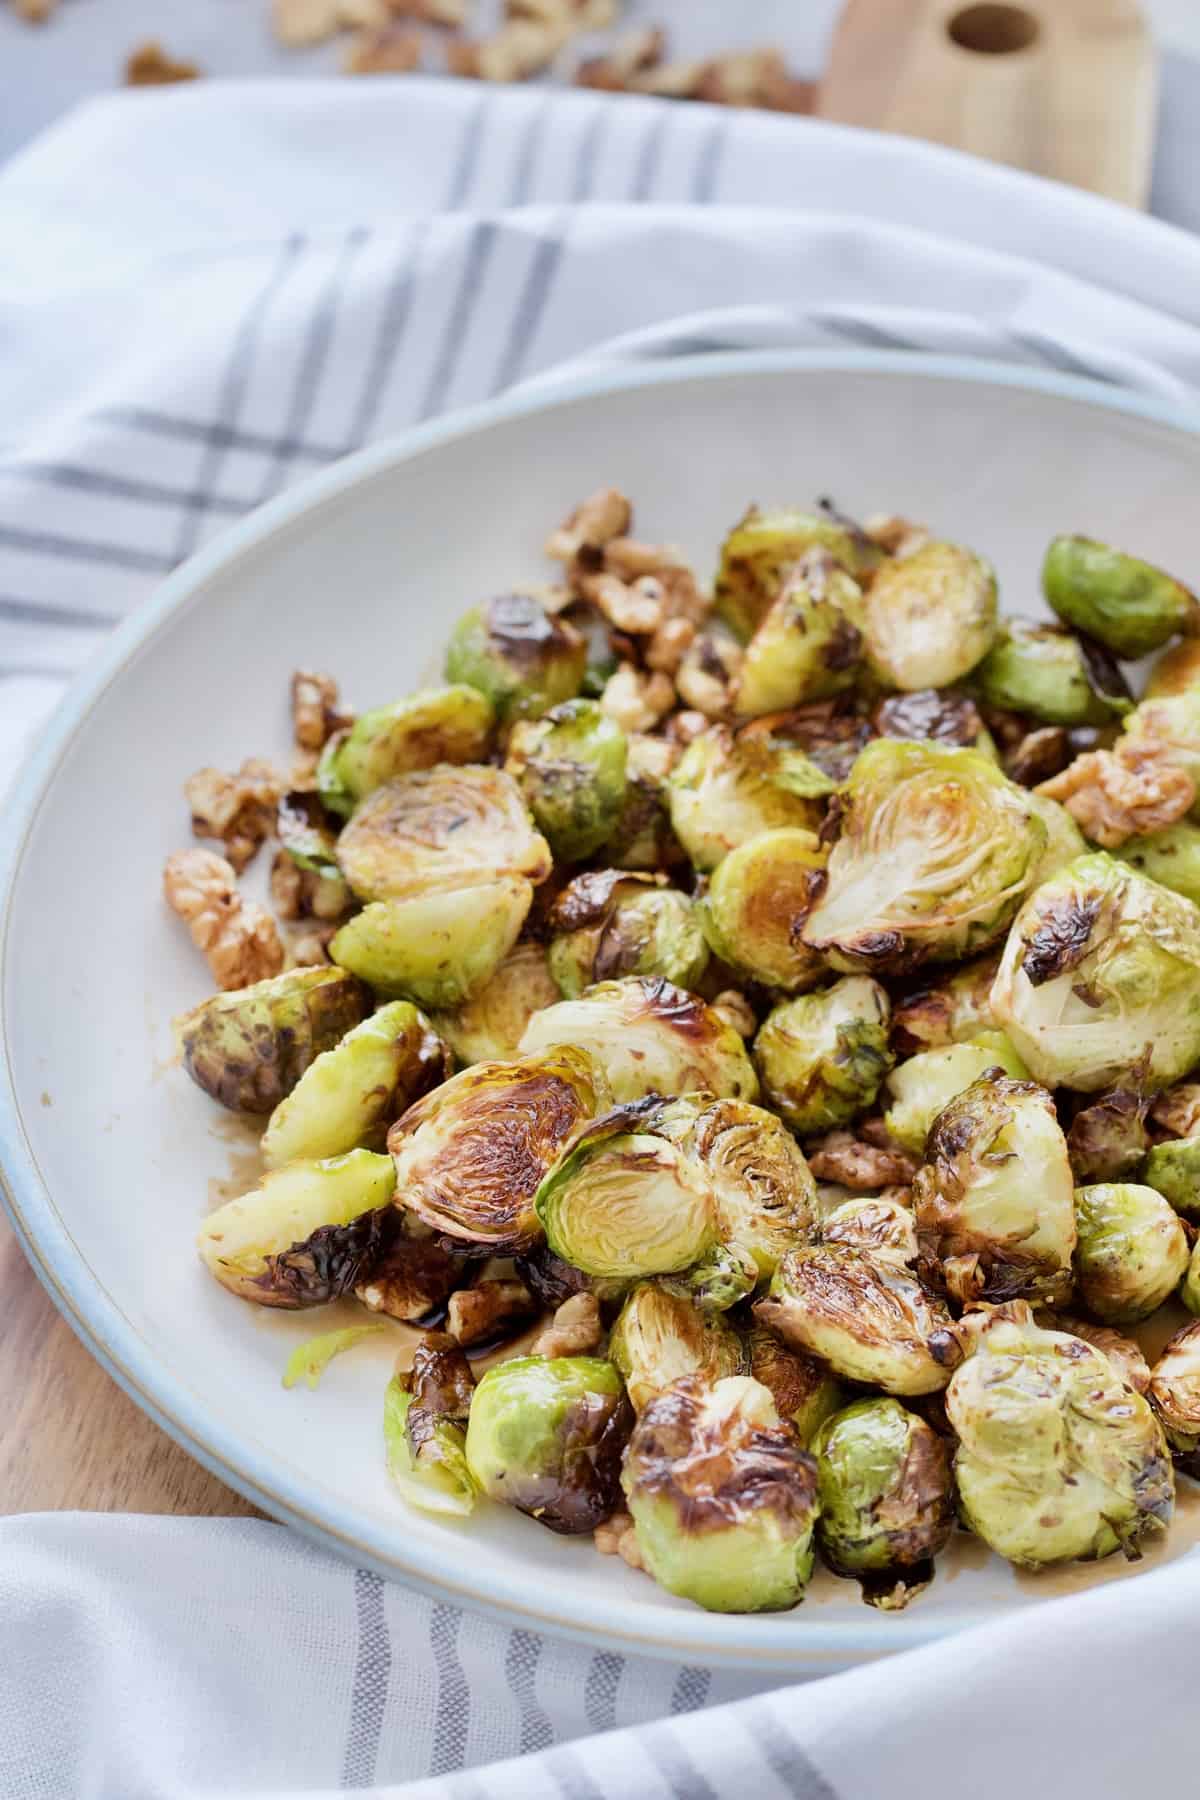 Angle view of a bowl with roasted Brussels sprouts.